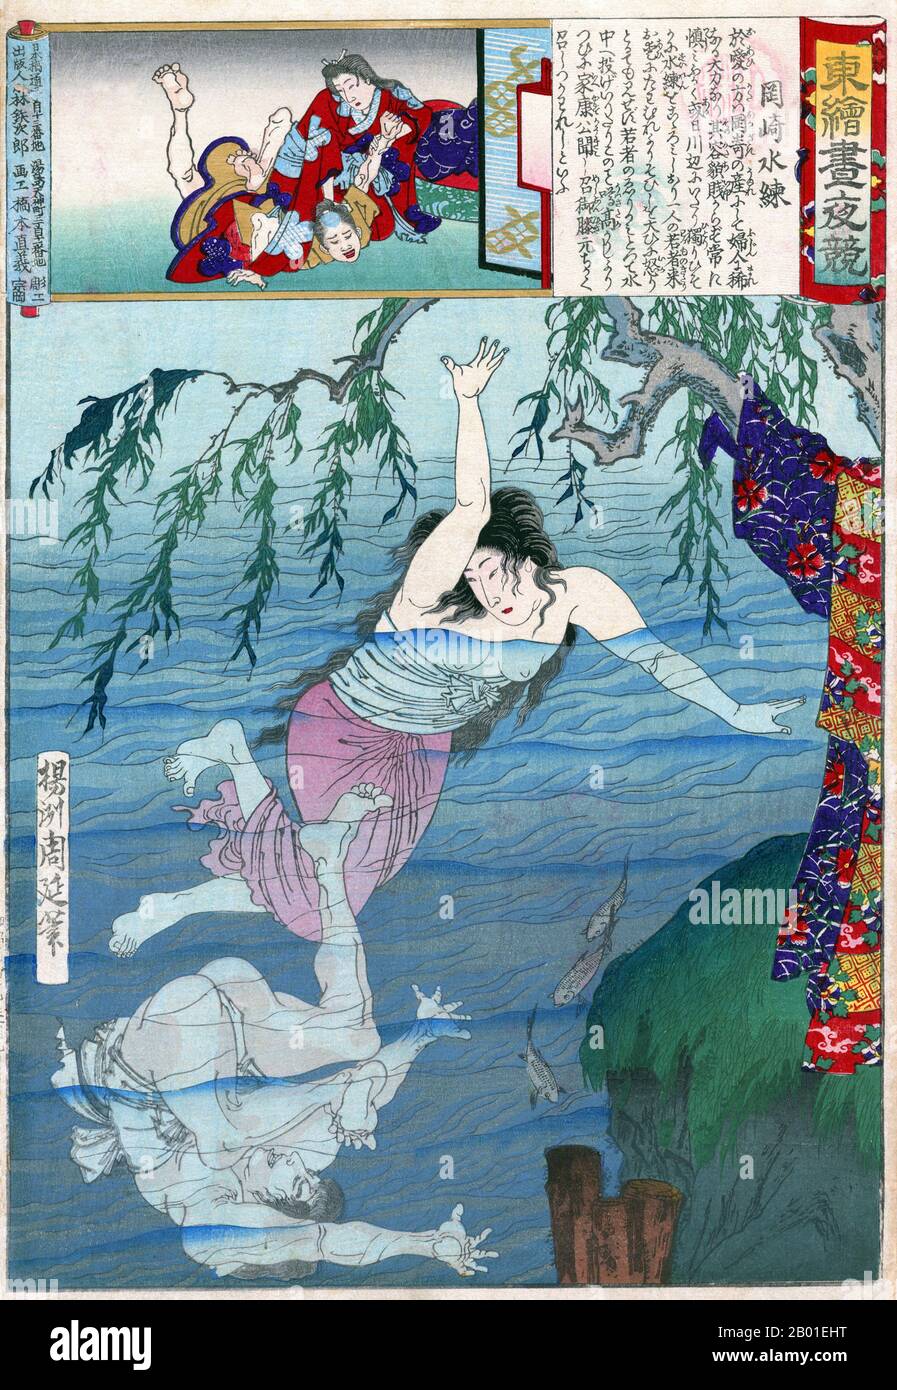 Japan: Oai No Kata swimming at Okazaki. Ukiyo-e woodblock print by Yoshu Chikanobu (1838-1912), 1886.  Oai No kata was born in Okazaki and was both beautiful and strong, although of low social status. One day while swimming in a river, a young man tried to bother her, but she quickly defeated him. According to the cartouche, even the shogun Tokugawa Ieyasu praised her courage.  Toyohara Chikanobu, better known to his contemporaries as Yōshū Chikanobu, was a prolific woodblock artist of Japan's Meiji period. His works capture the transition from the age of the samurai to Meiji modernity. Stock Photo